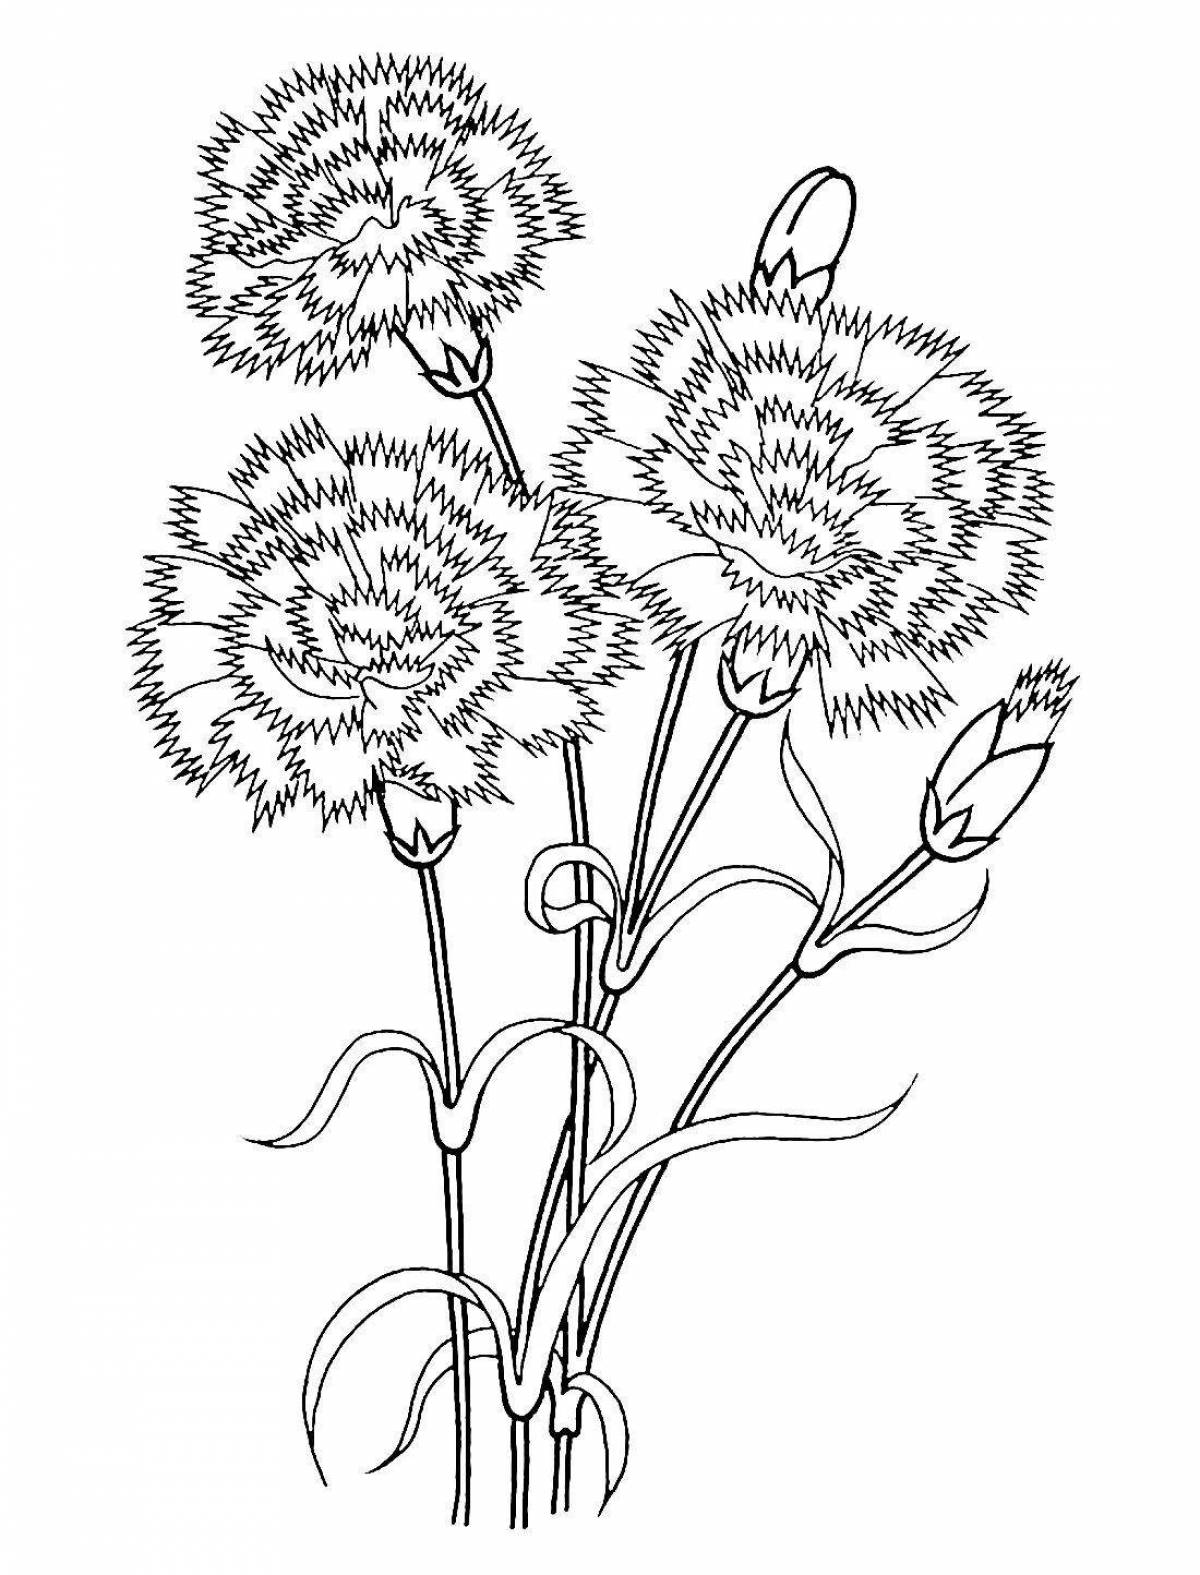 Adorable carnation coloring page